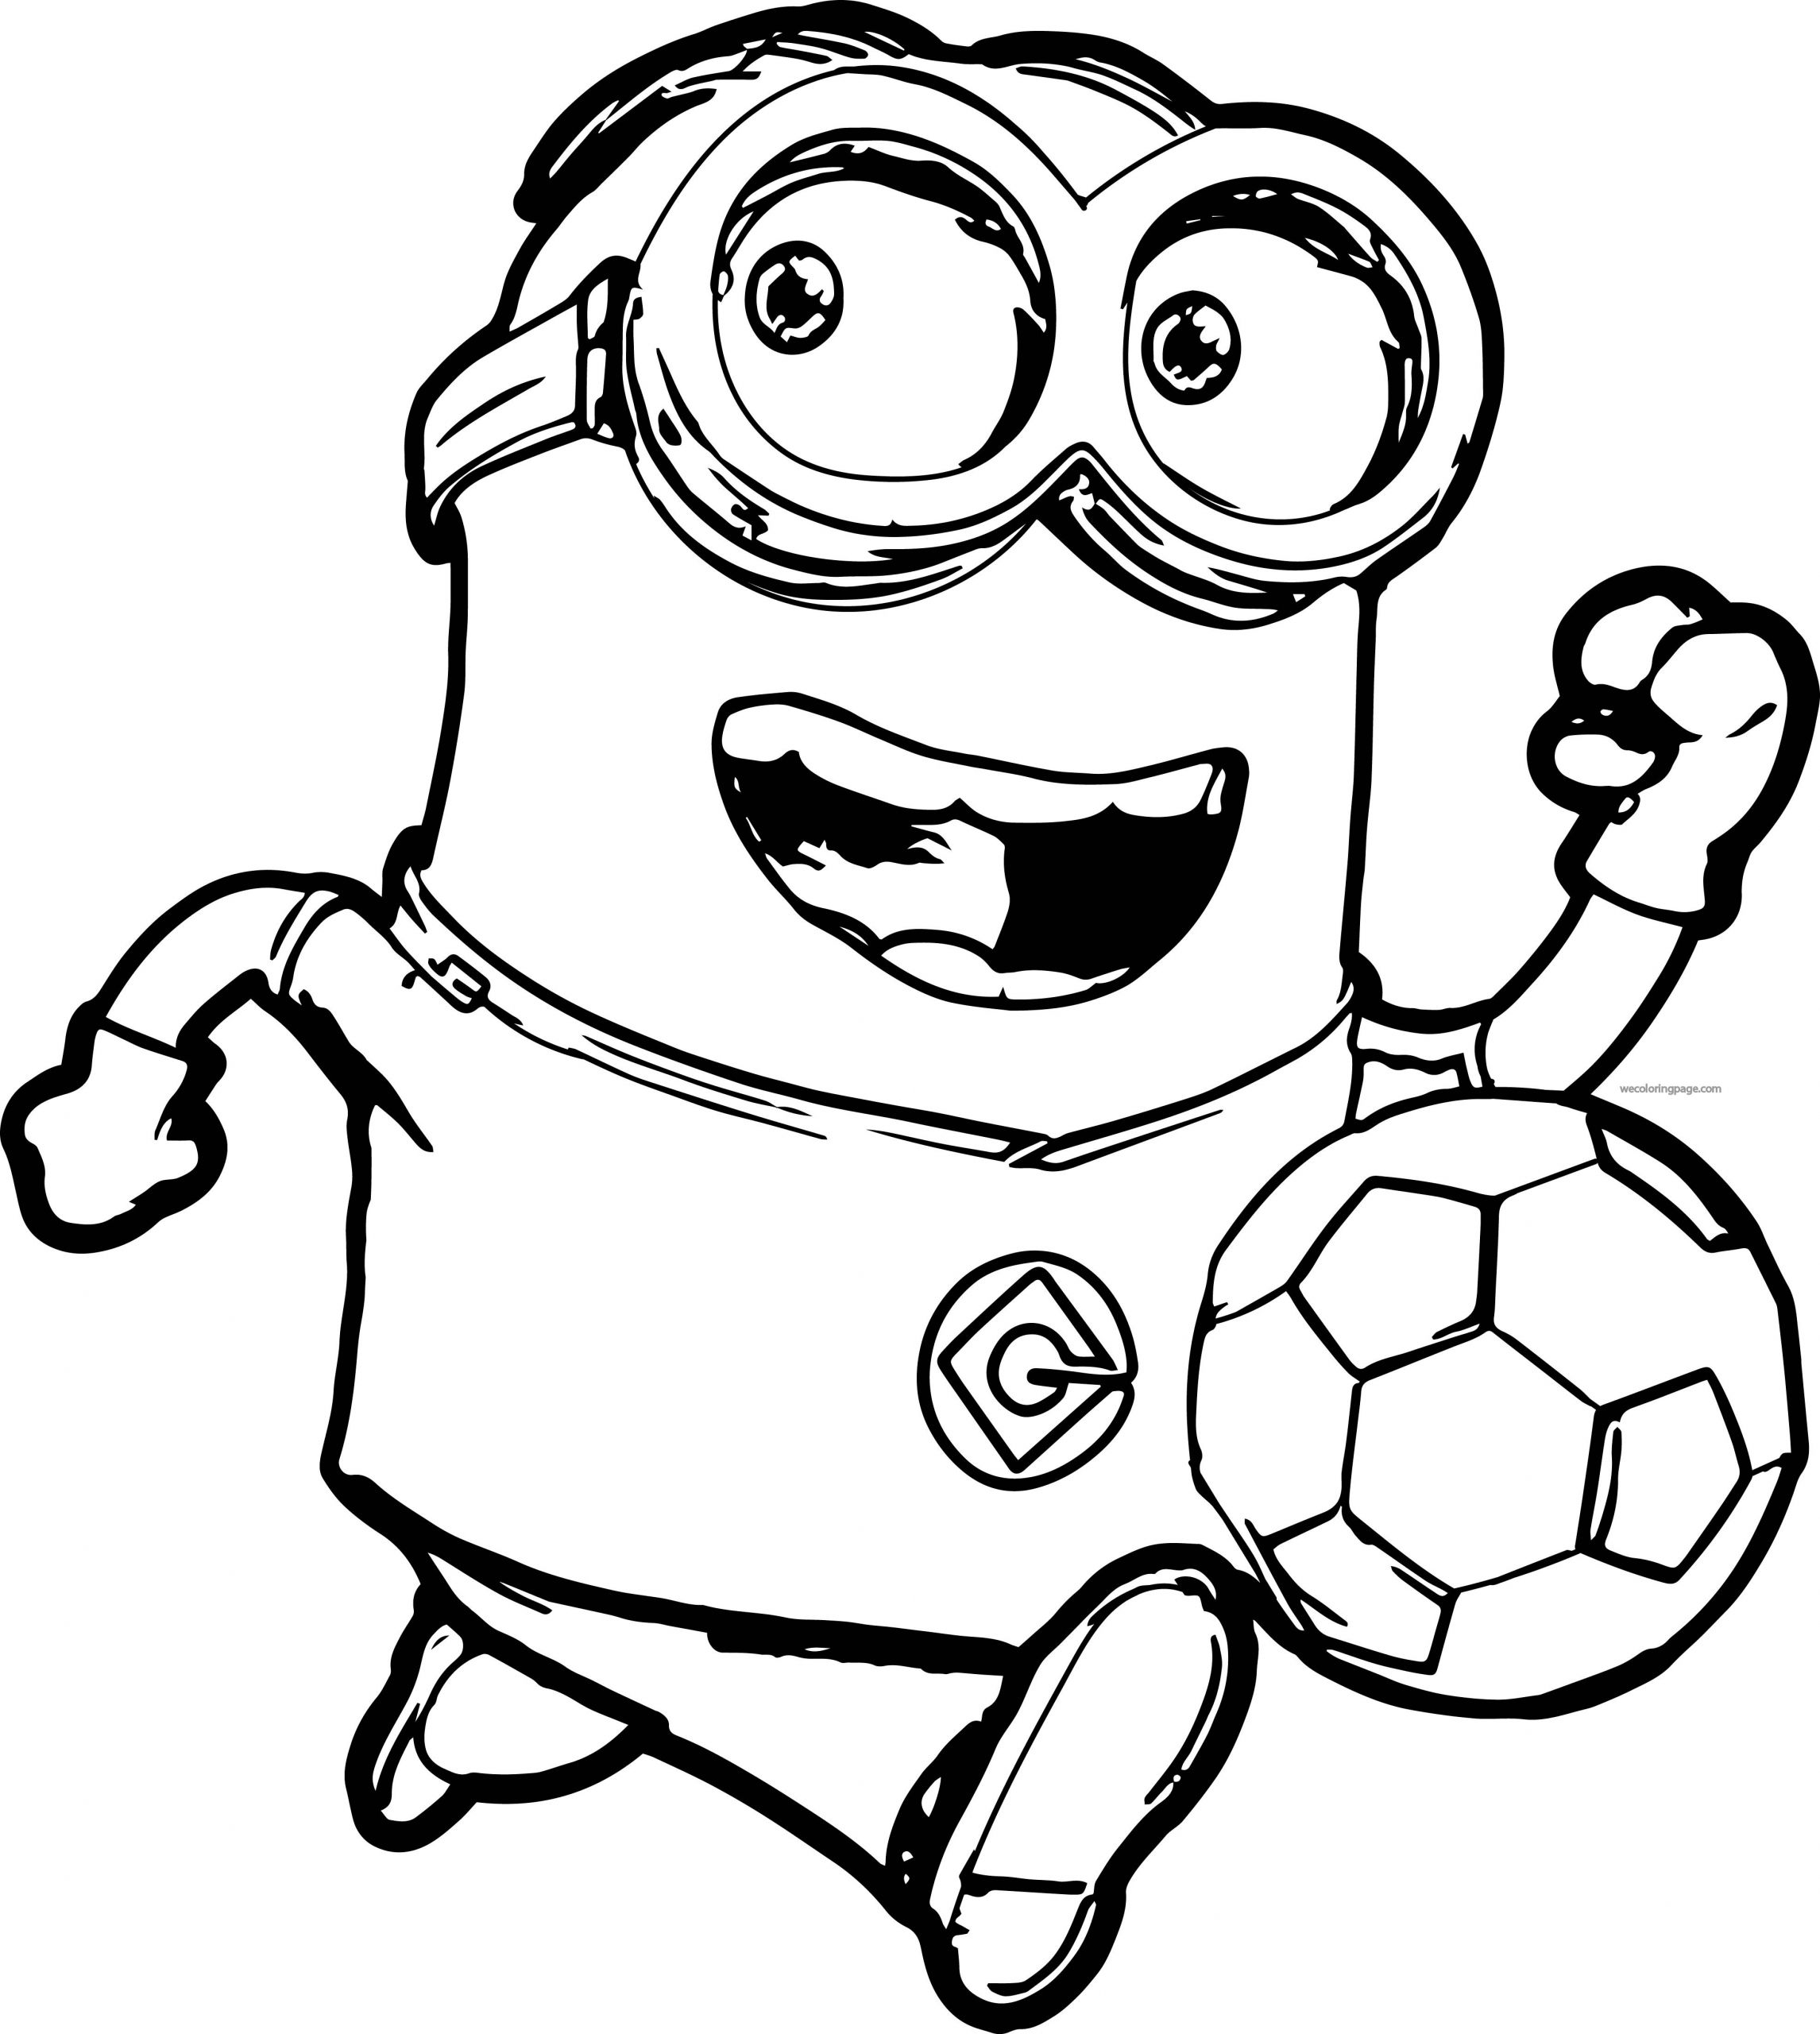 Download Coloring Pages For Kids
 Minion Coloring Pages Best Coloring Pages For Kids